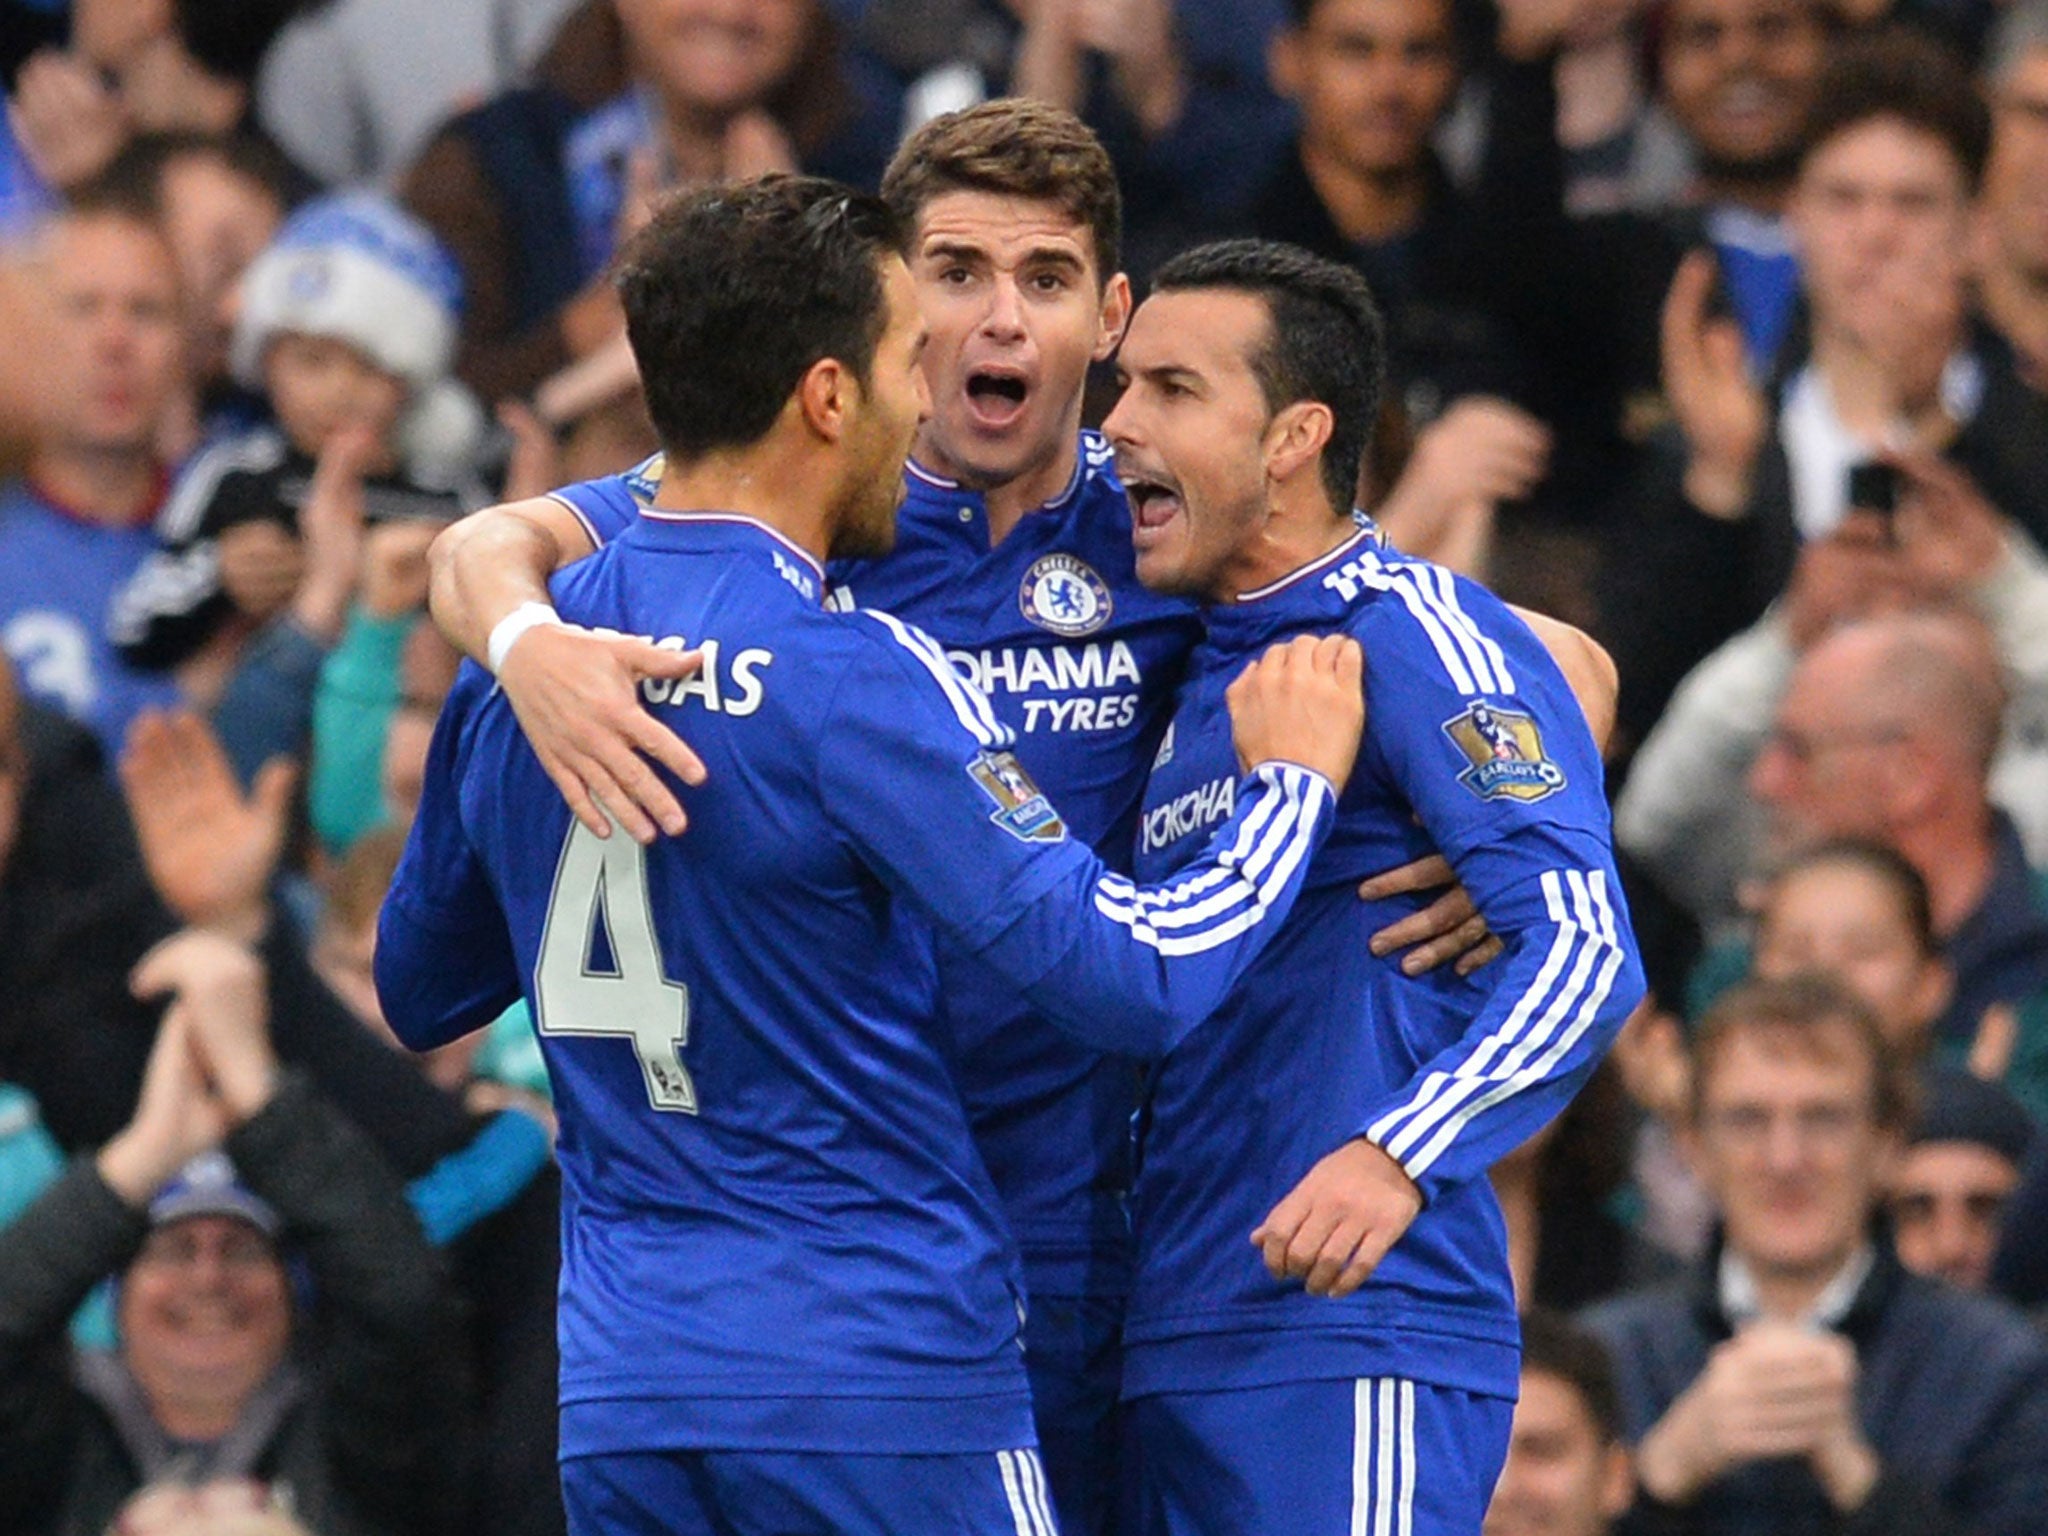 Chelsea’s Spanish midfielder Pedro, right, celebrates with Oscar, centre, and Cesc Fabregas after scoring against Sunderland at Stamford Bridge